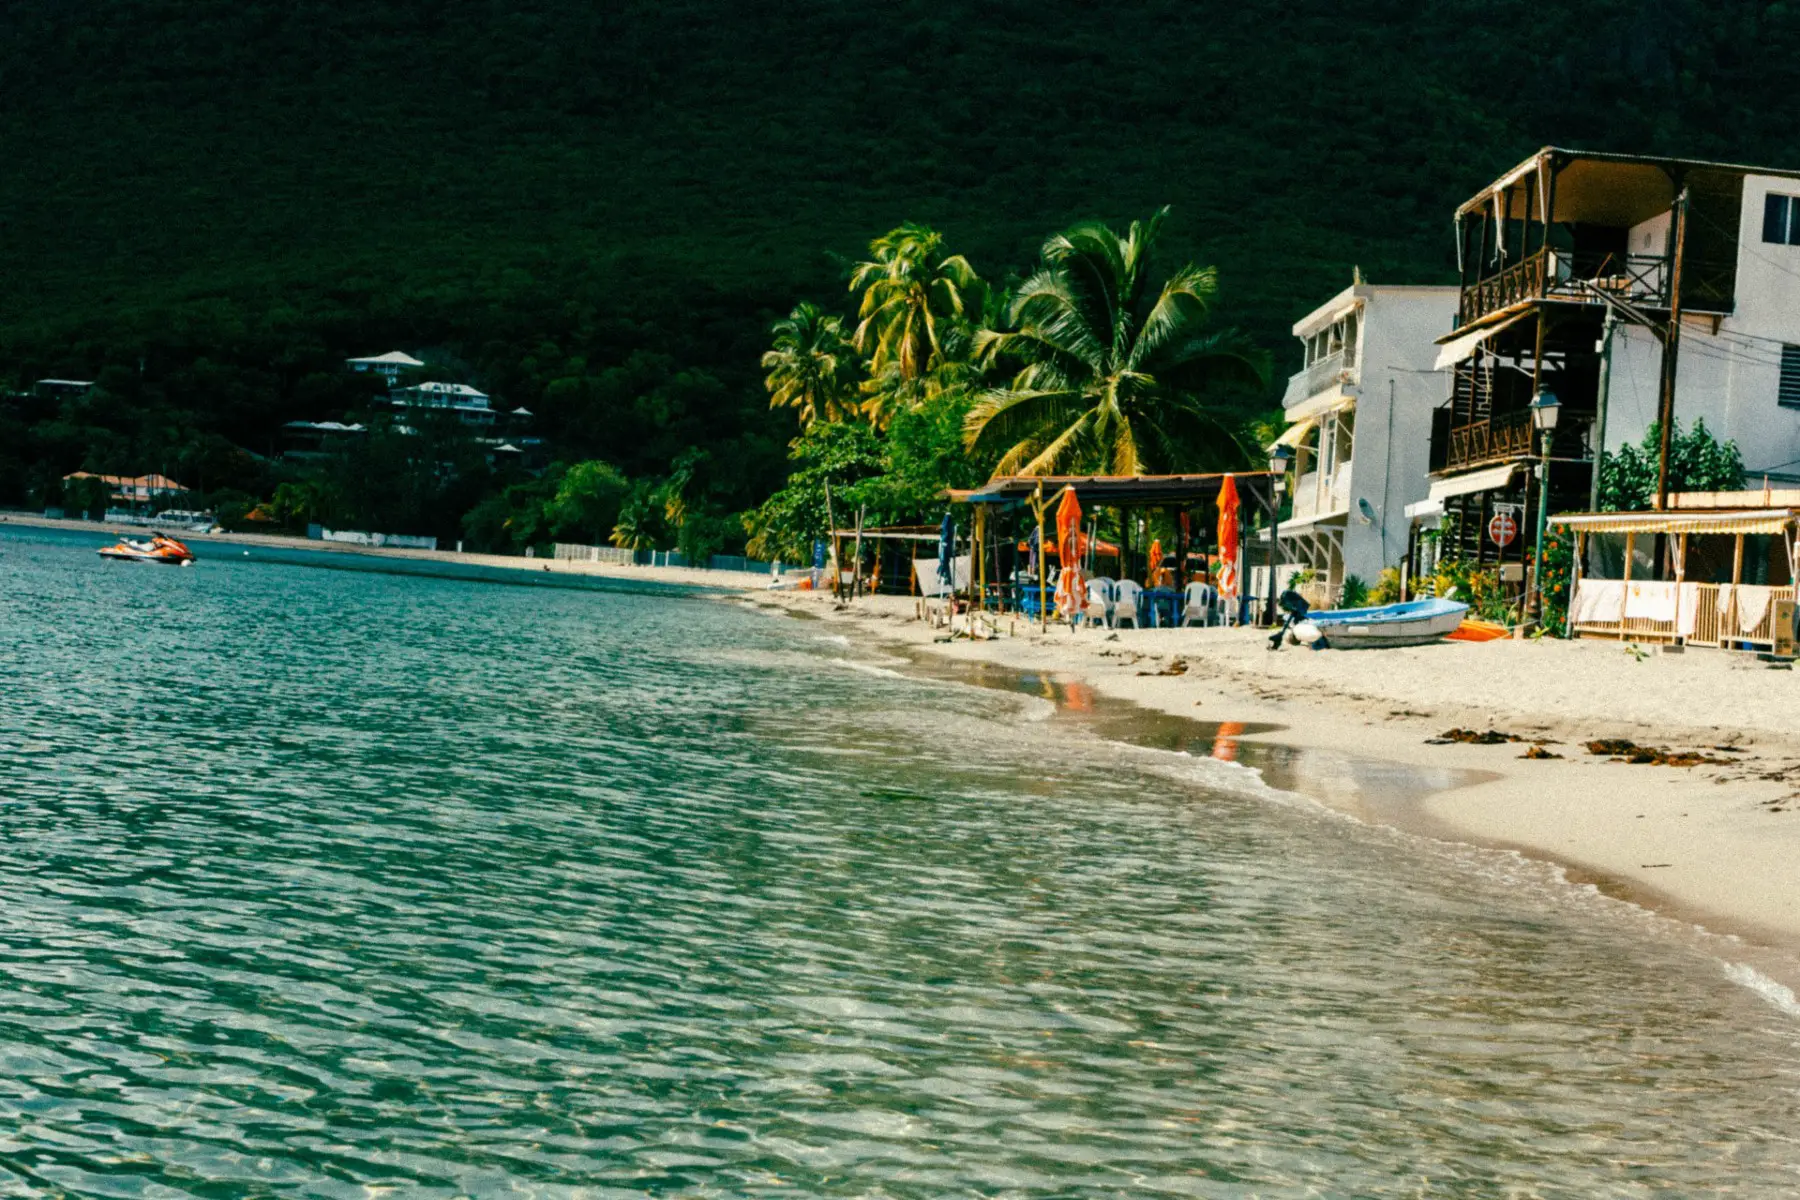 Beach front of Les Anses-d'Arlet on the island of Martinique, a french overseas territory.